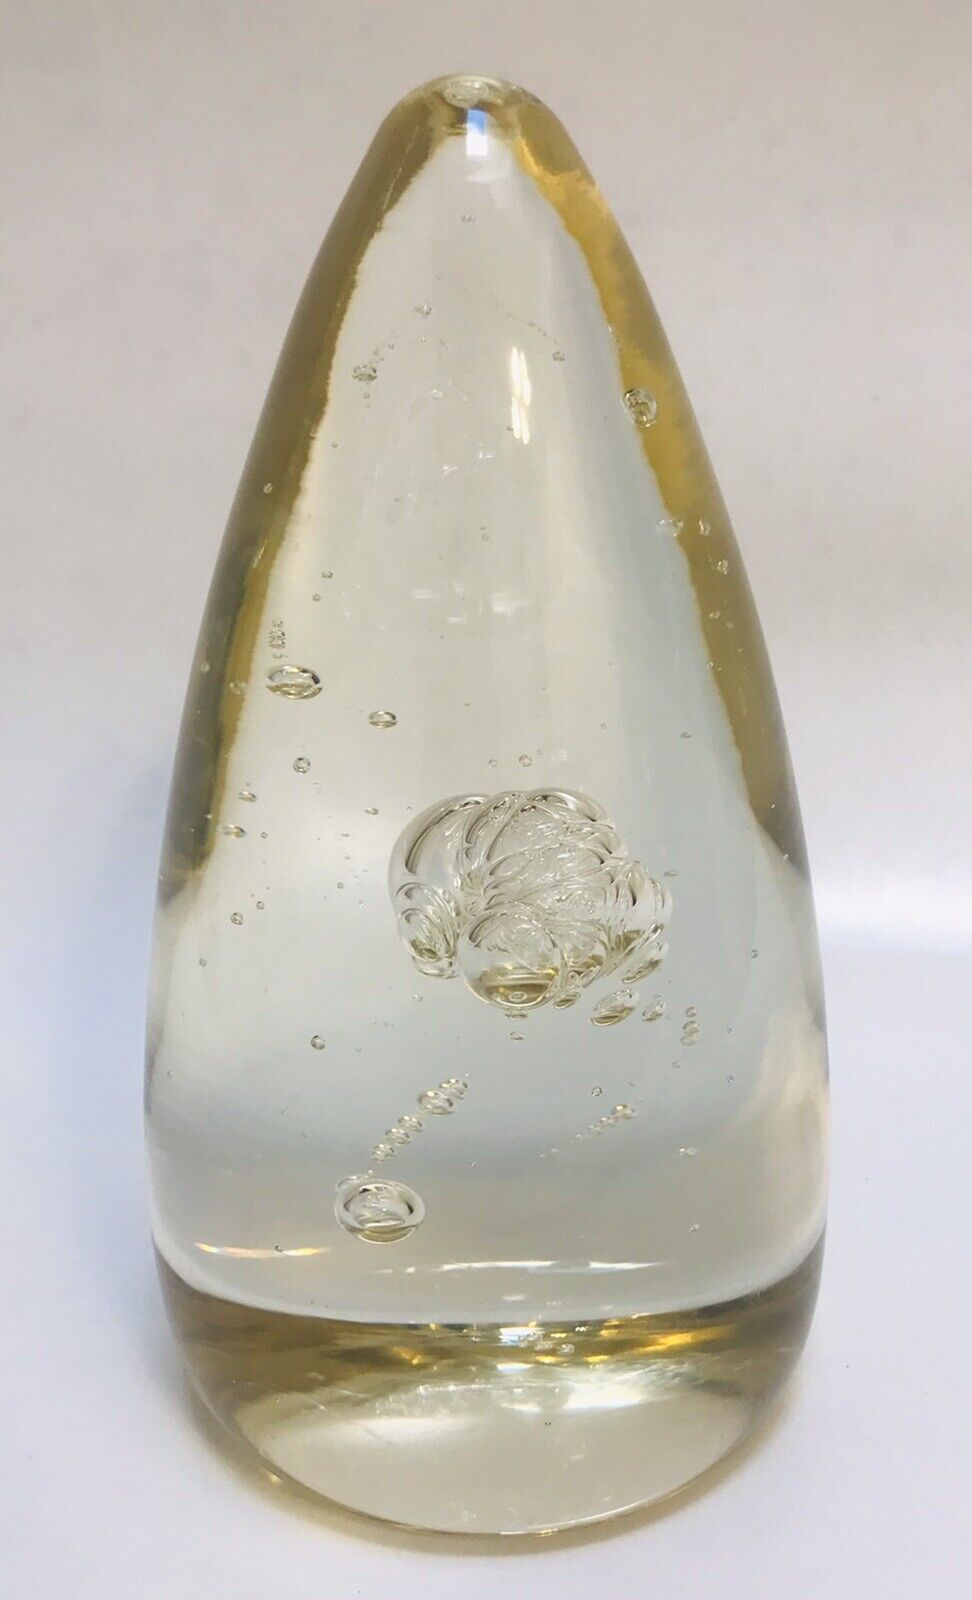 Art Glass Egg Shaped Paper Weight  Clear With Bubbles Inside 5.5”